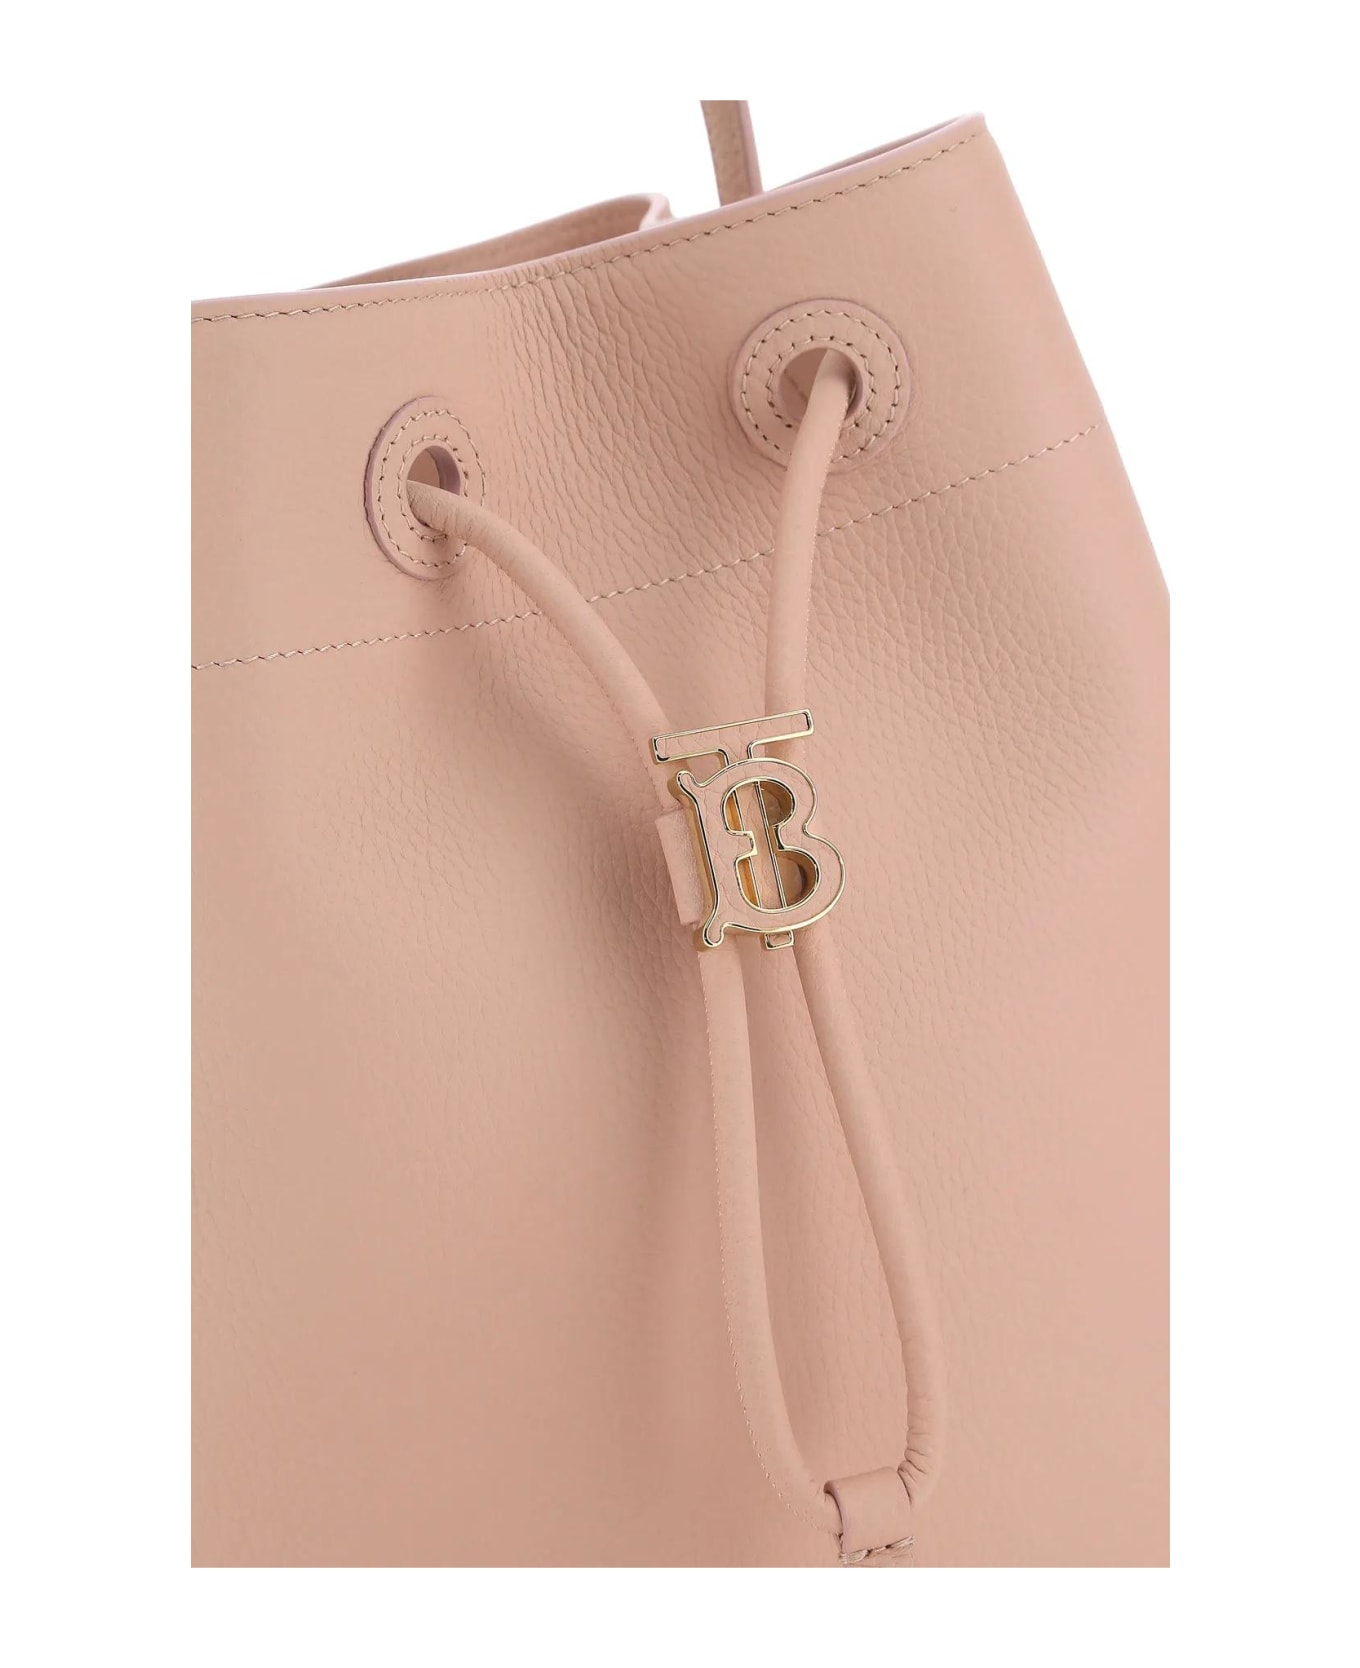 Burberry Pink Leather Small Tb Bucket Bag - A3661 トートバッグ